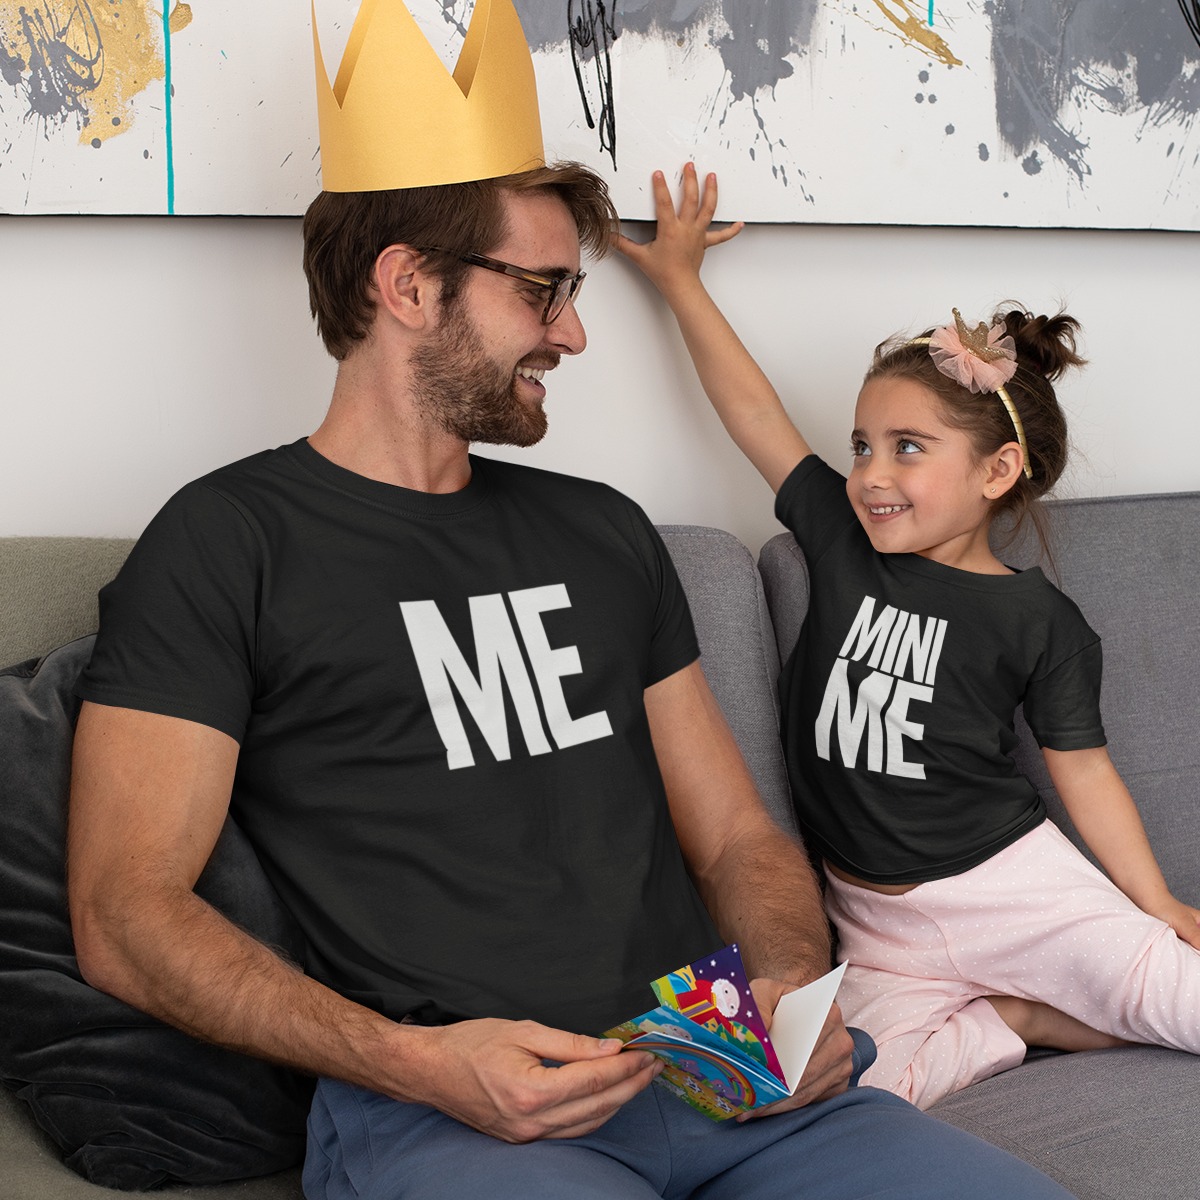 chaos Vergissing ethisch Vader Dochter T-shirts - Me & Mini Me | Groot aanbod